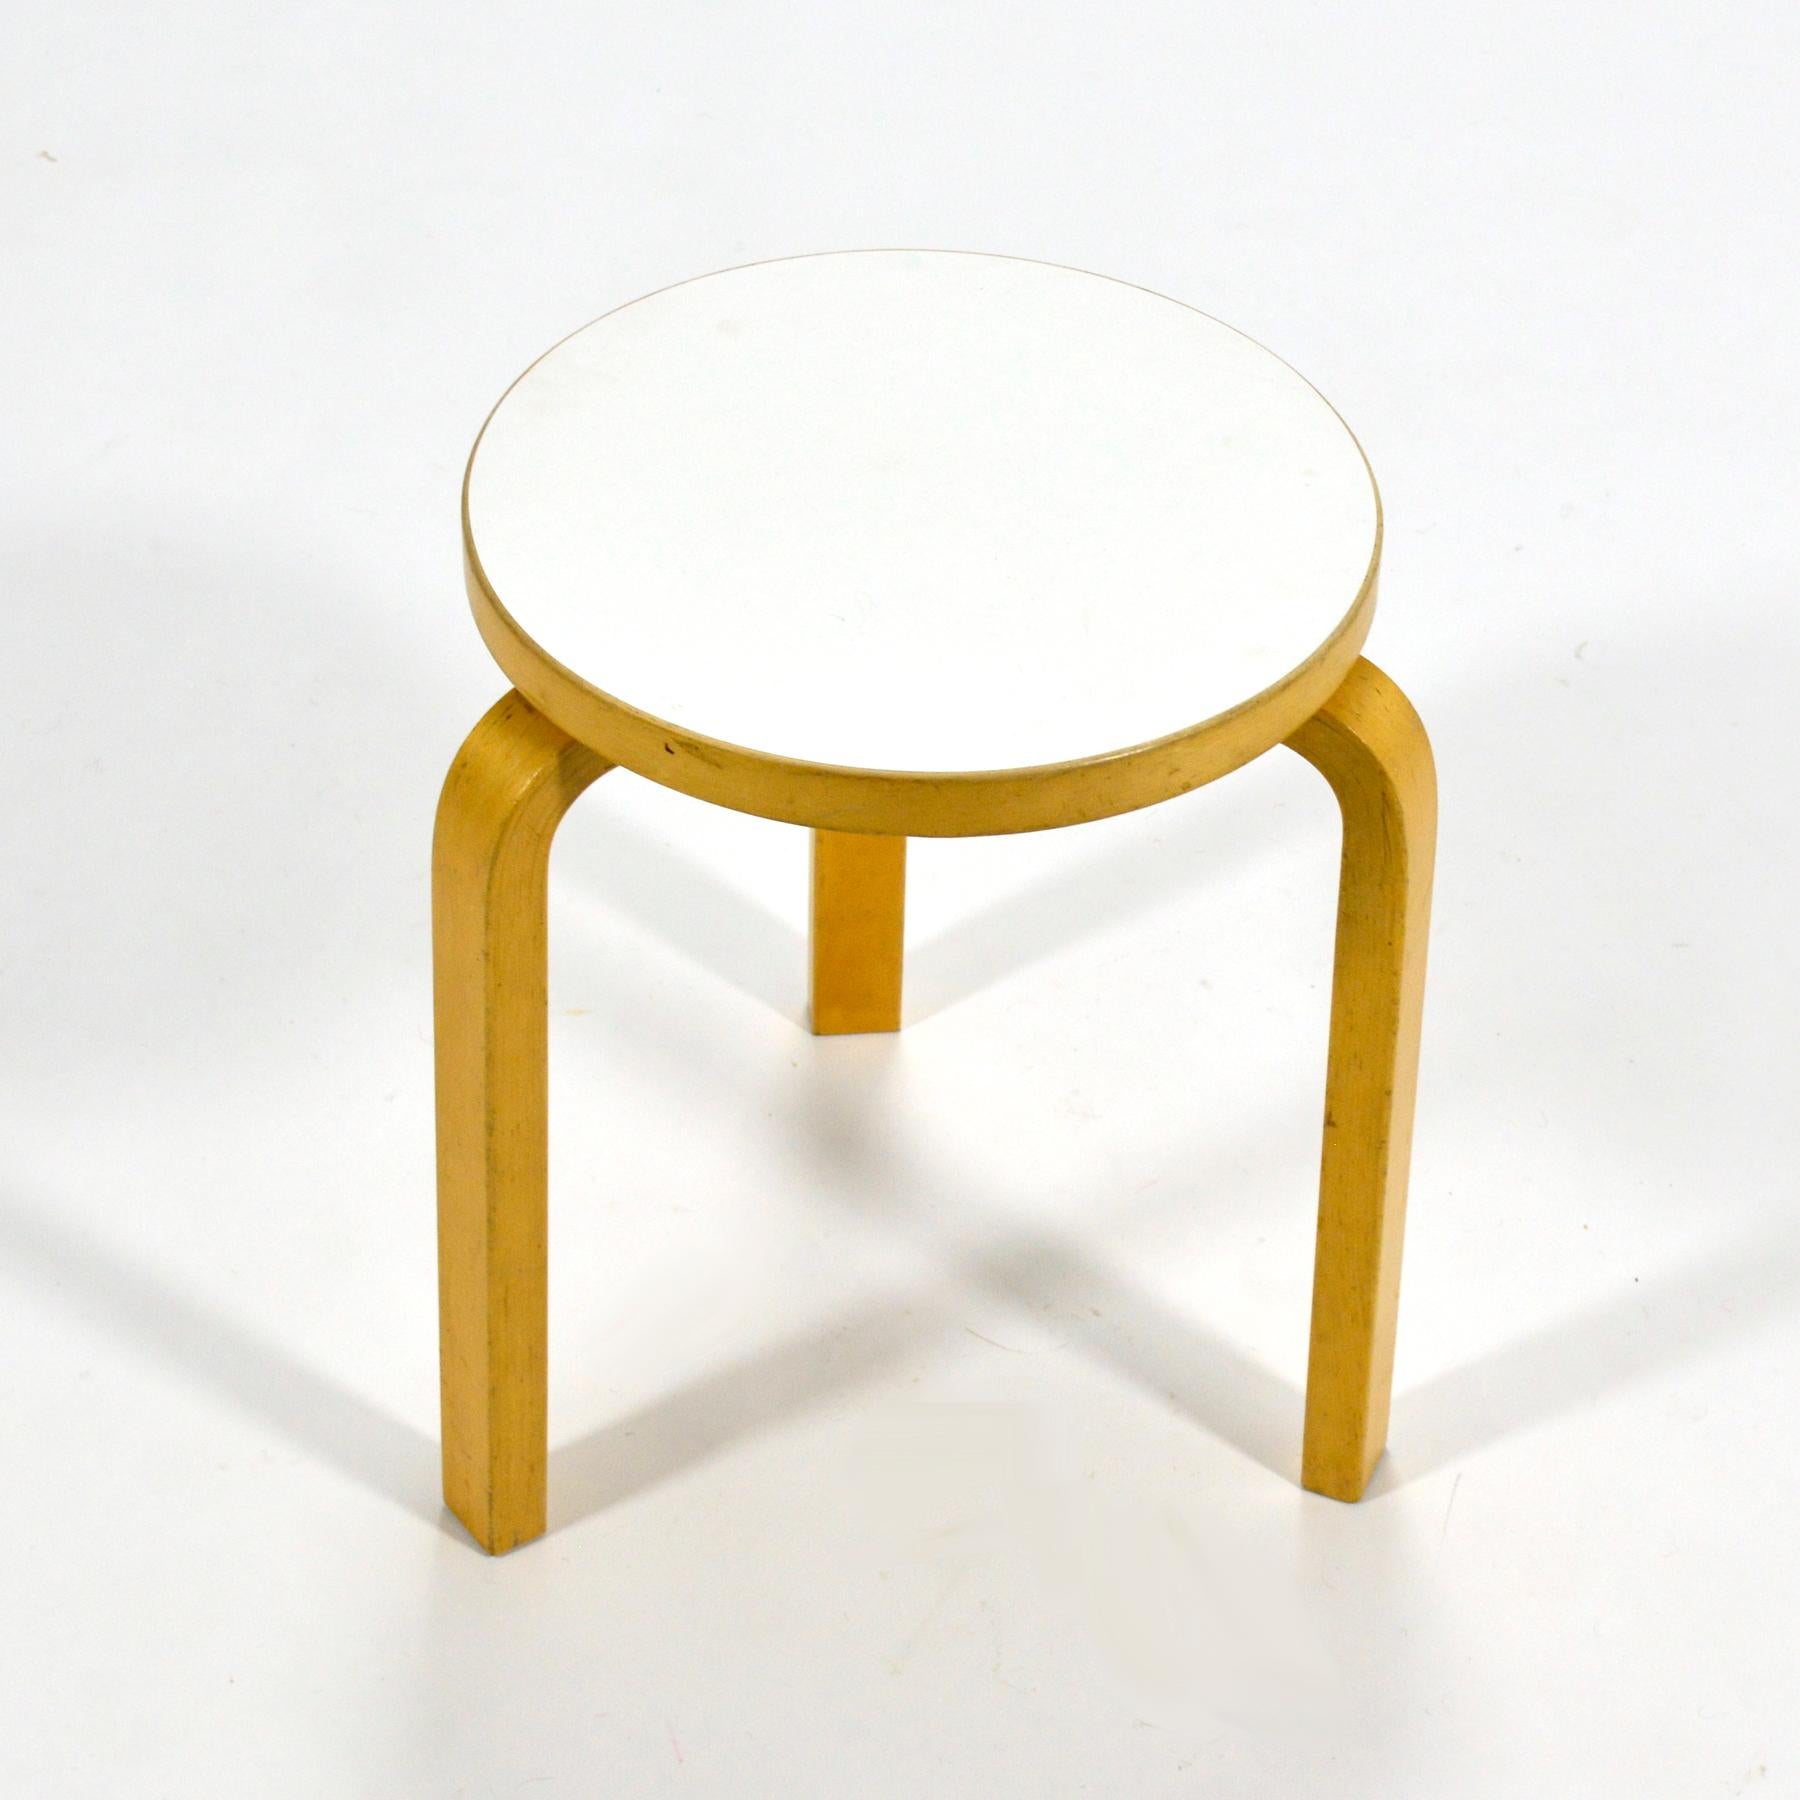 Aalto's stool 60 is the quintessential example of Aalto’s aesthetic. Designed in 1933, the bent, laminated birch legs with their sublime simplicity support a round top that can serve equally well as a seat or a table. This terrific vintage example